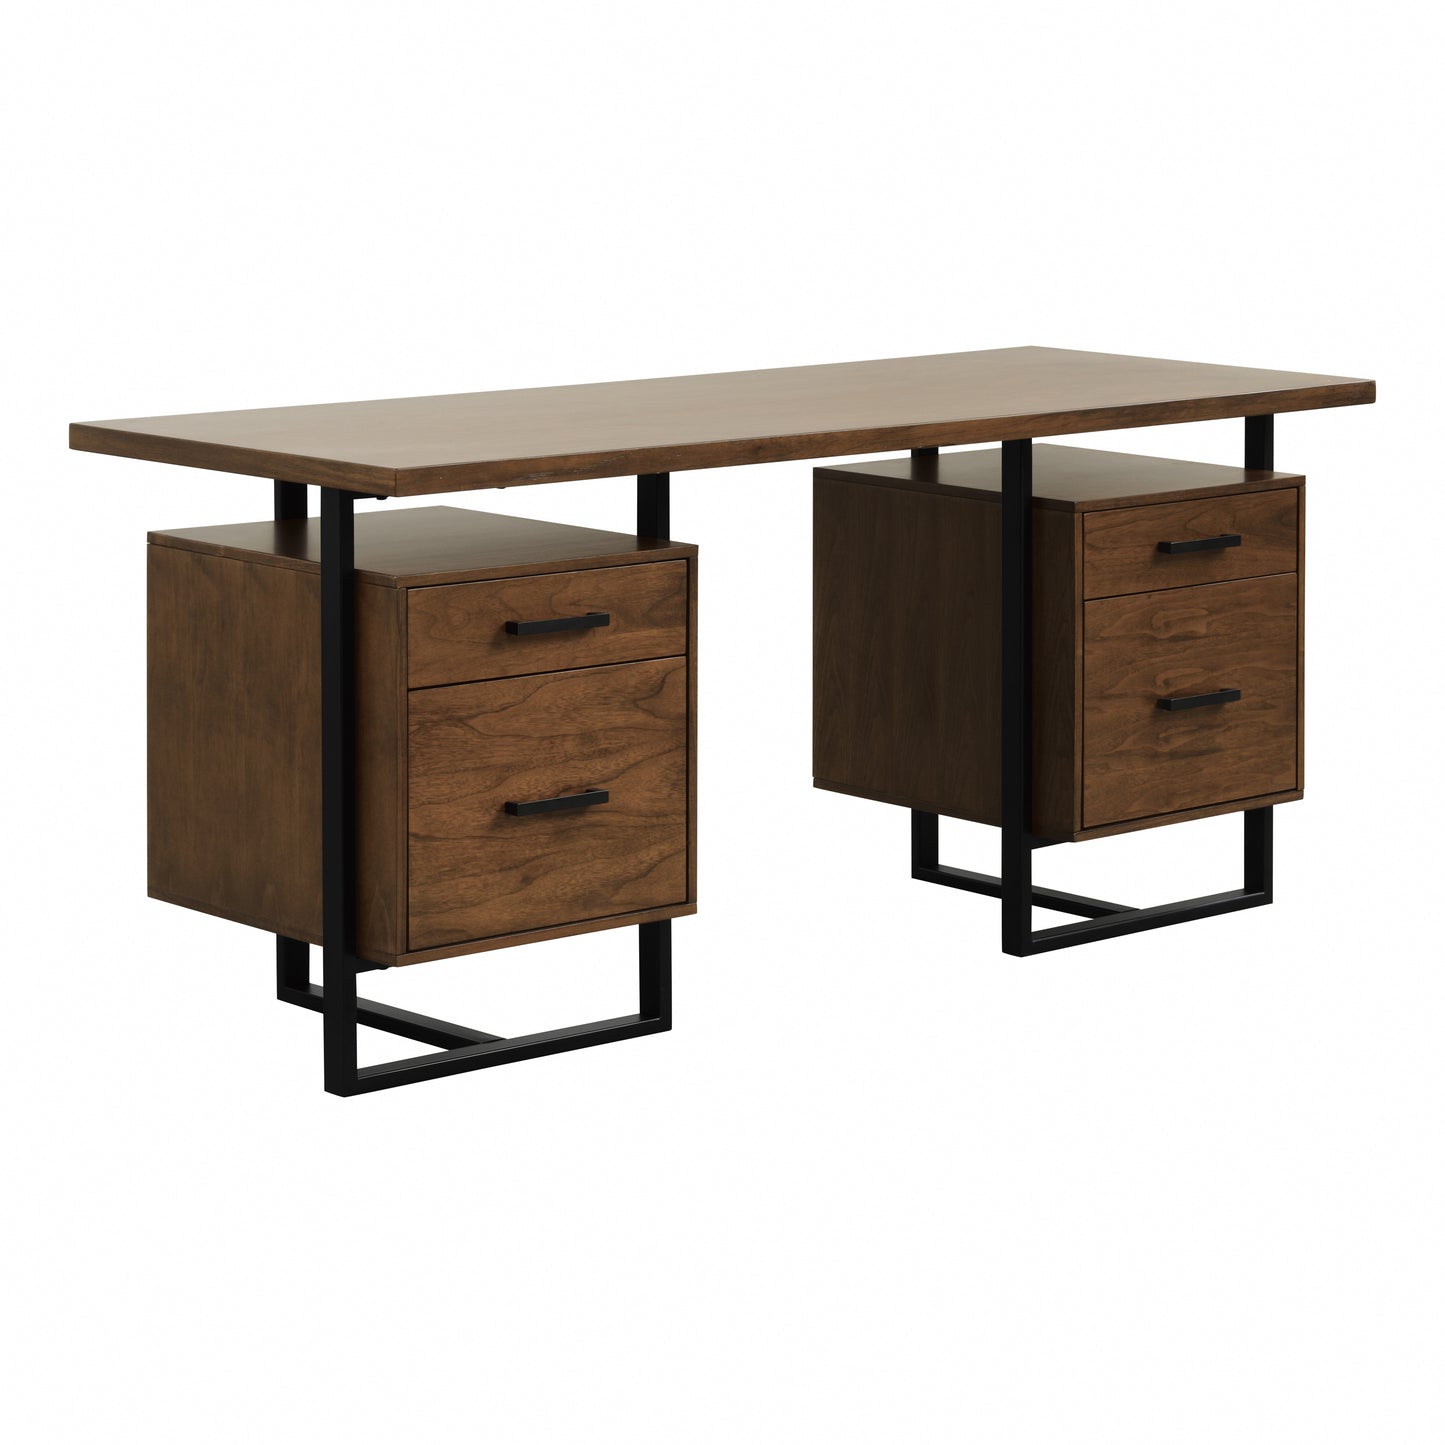 Sedley 66" Writing Desk ONE COLOR ONLY